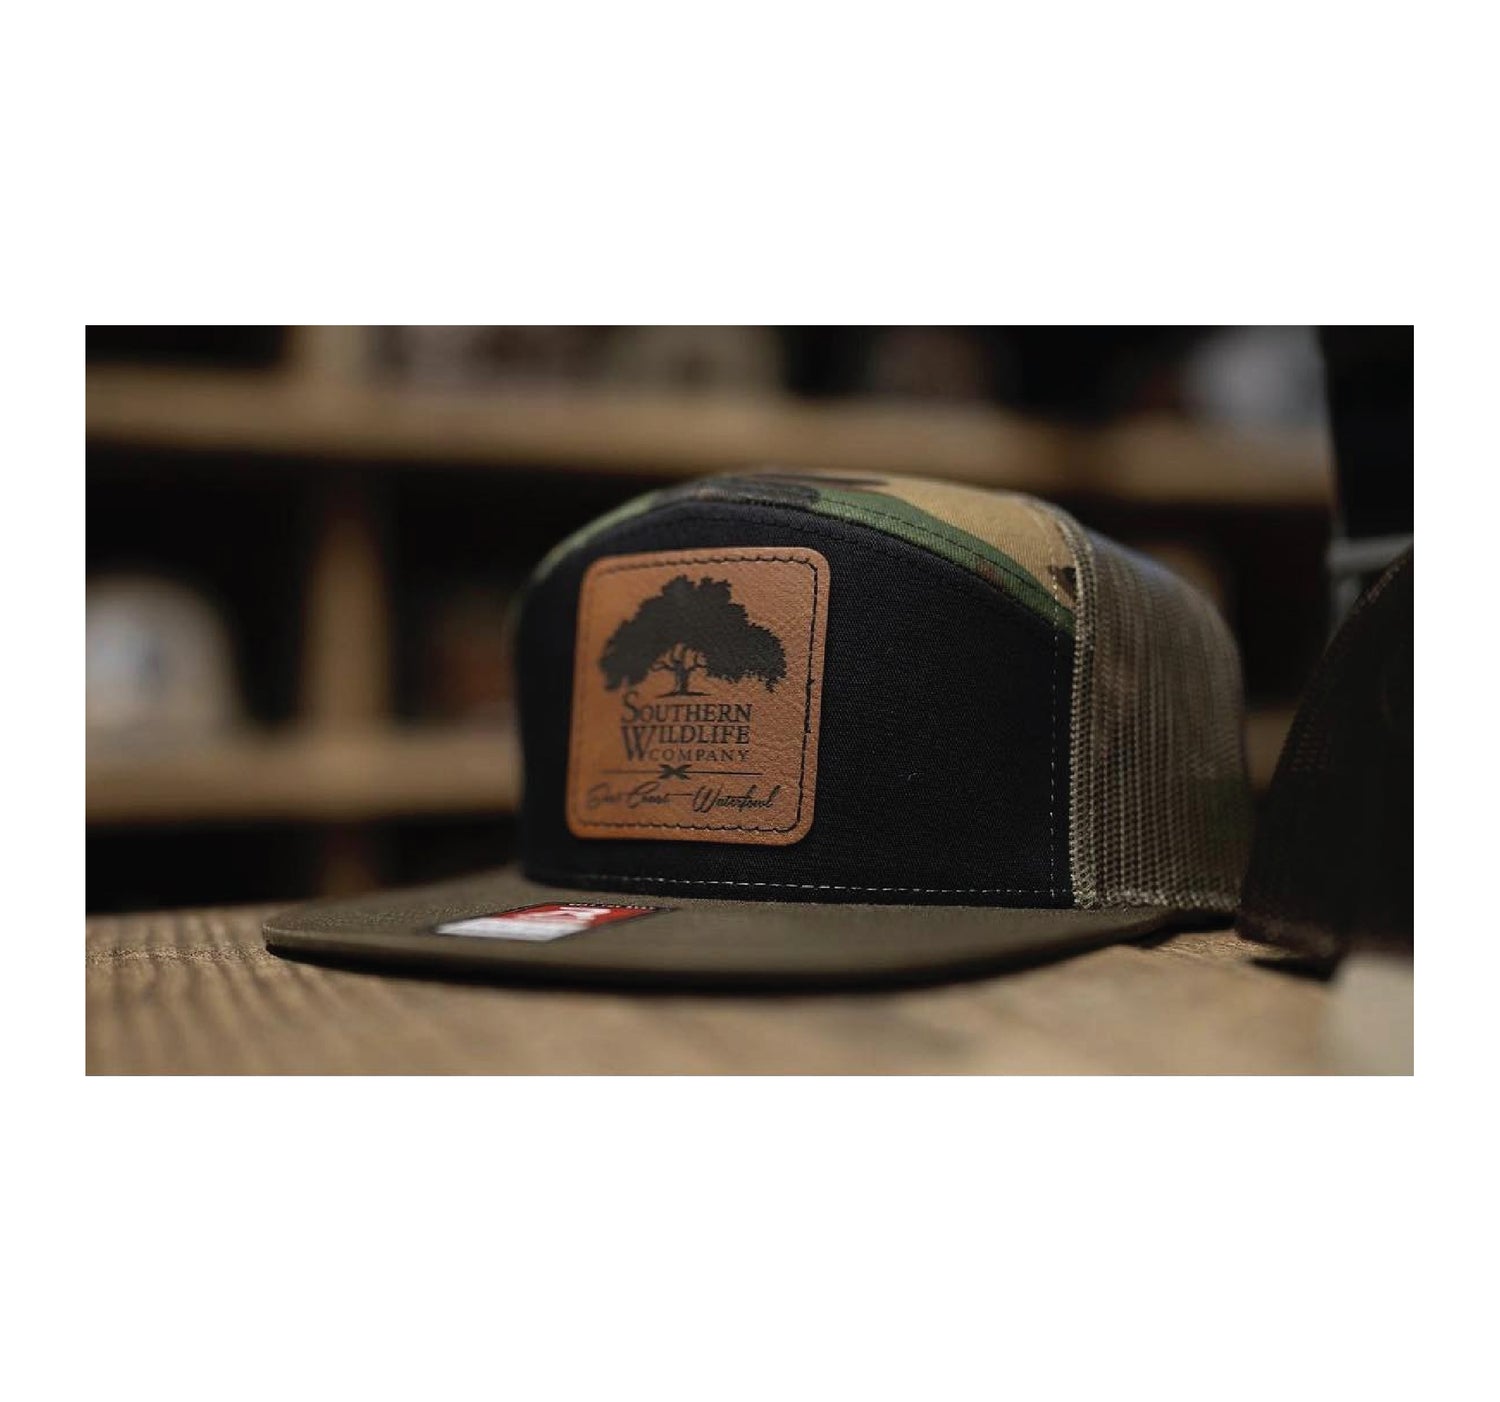 Southern Wildlife Hats